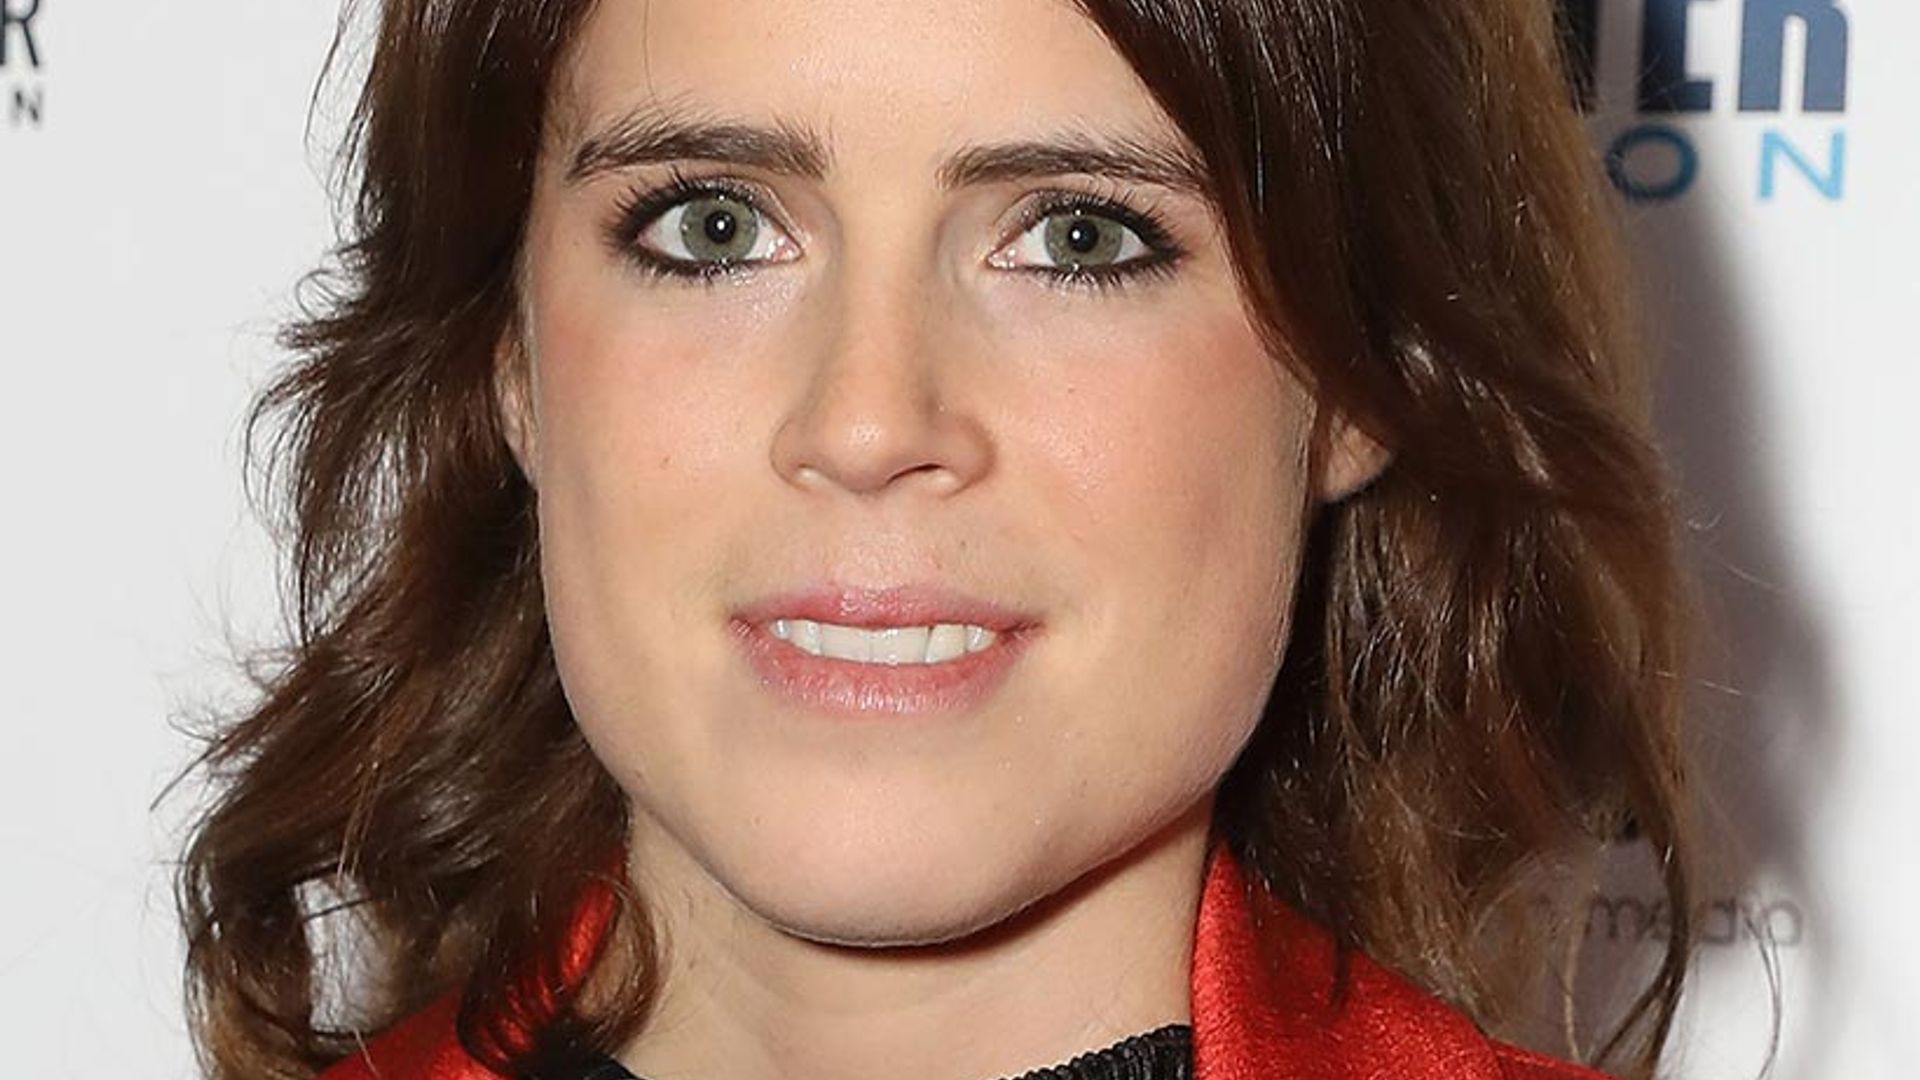 Princess Eugenie takes tips from sister Beatrice in red-carpet outfit